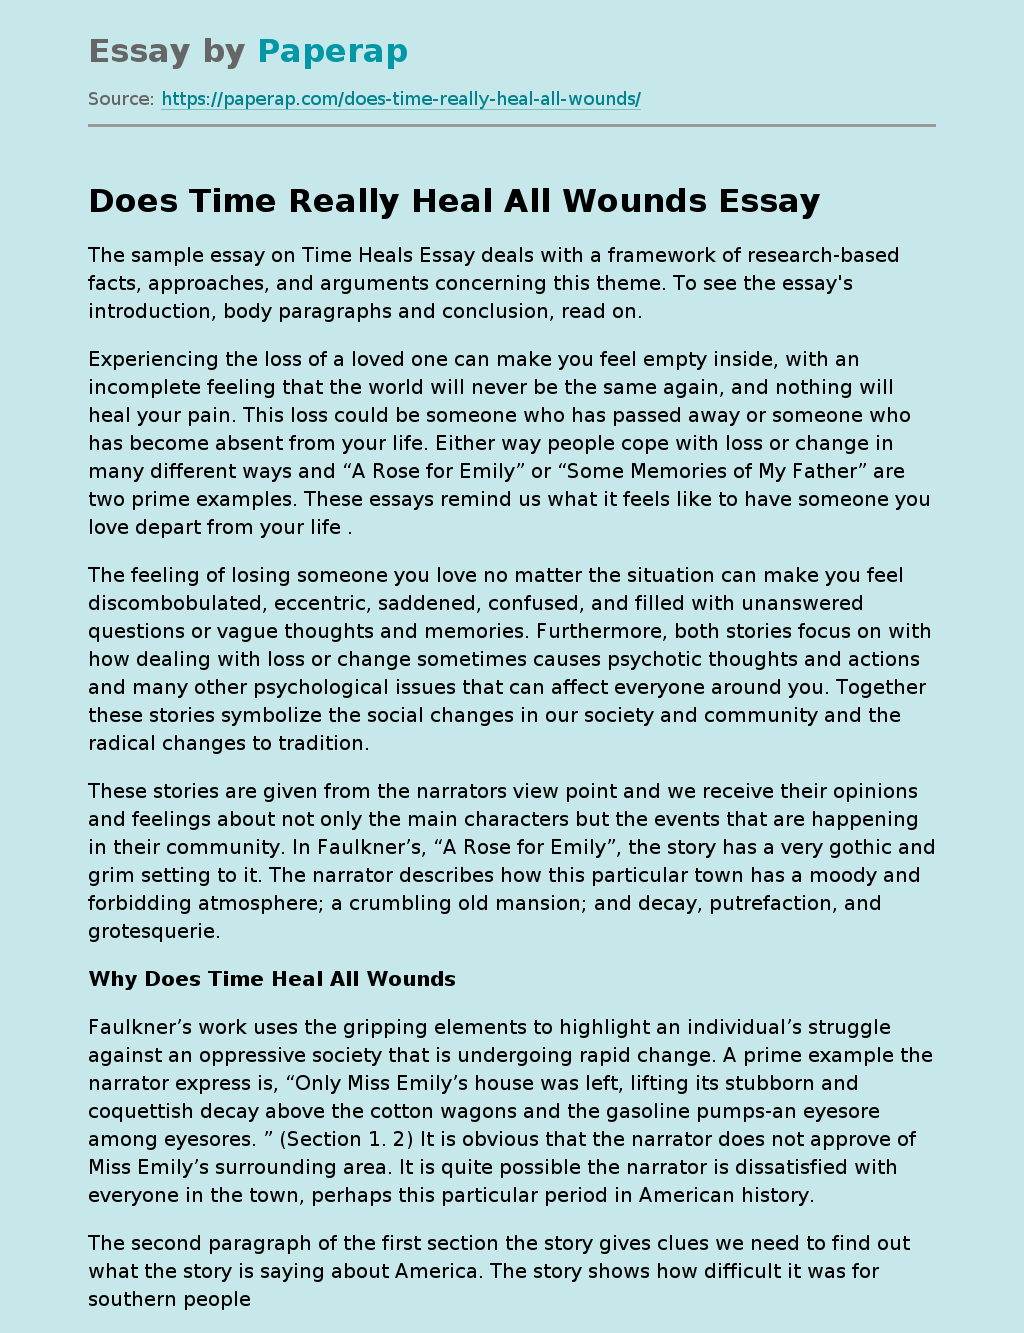 Does Time Really Heal All Wounds